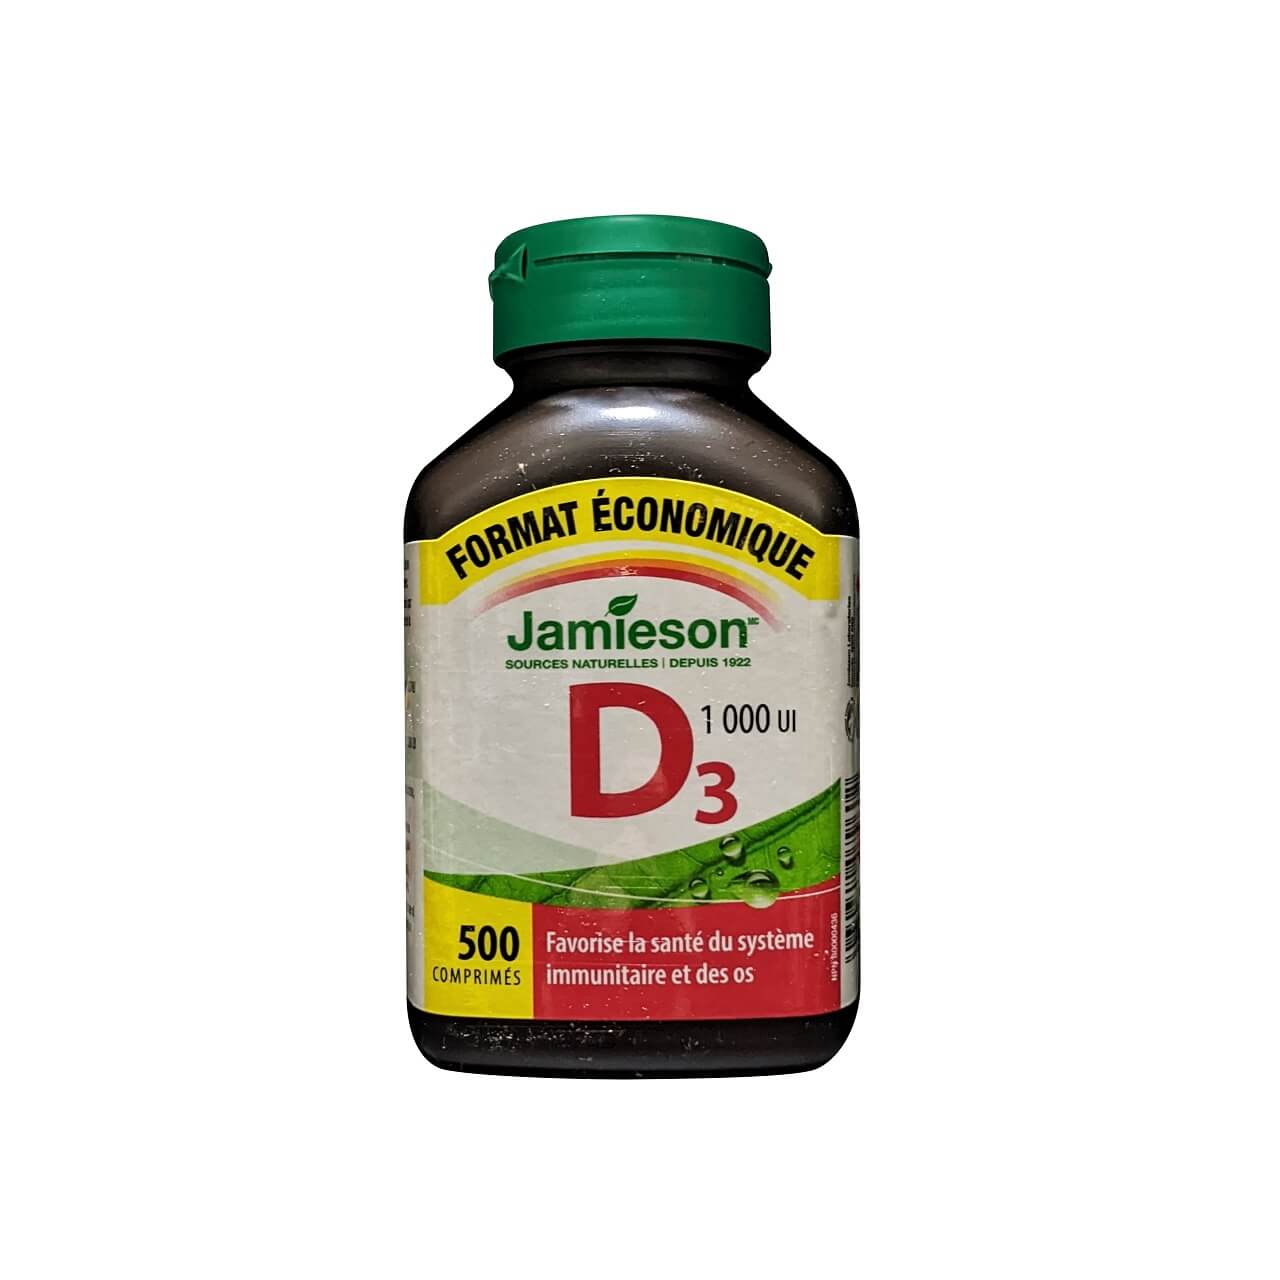 Product label for Jamieson Vitamin D3 1000 IU (500 tablets)in French